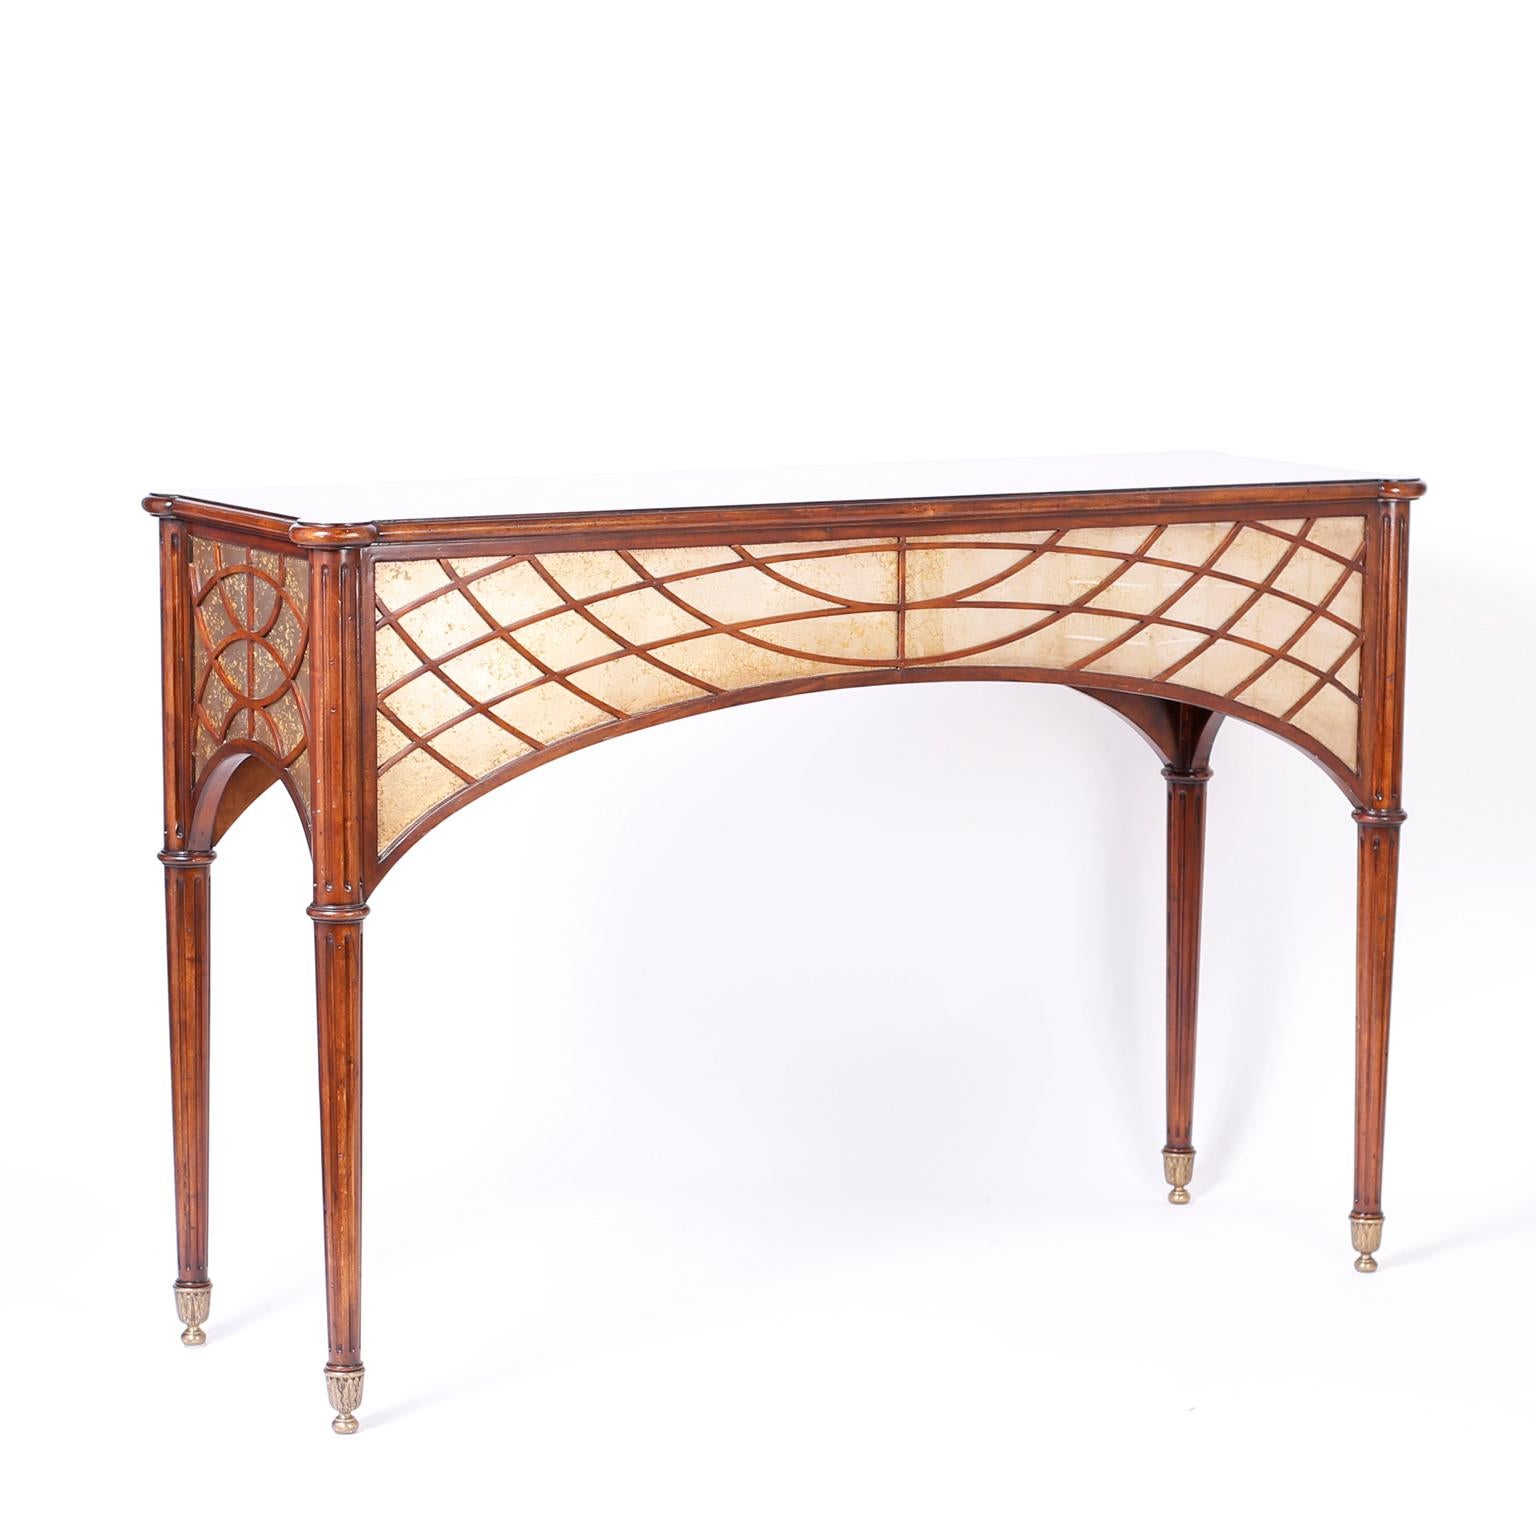 Rare and unusual antique English console table finished all around featuring a flame grained and crossbanded top over a distressed mirror and fretwork wood skirt. The long elegant legs are fluted and sit on cast brass feet with acanthus leaves.